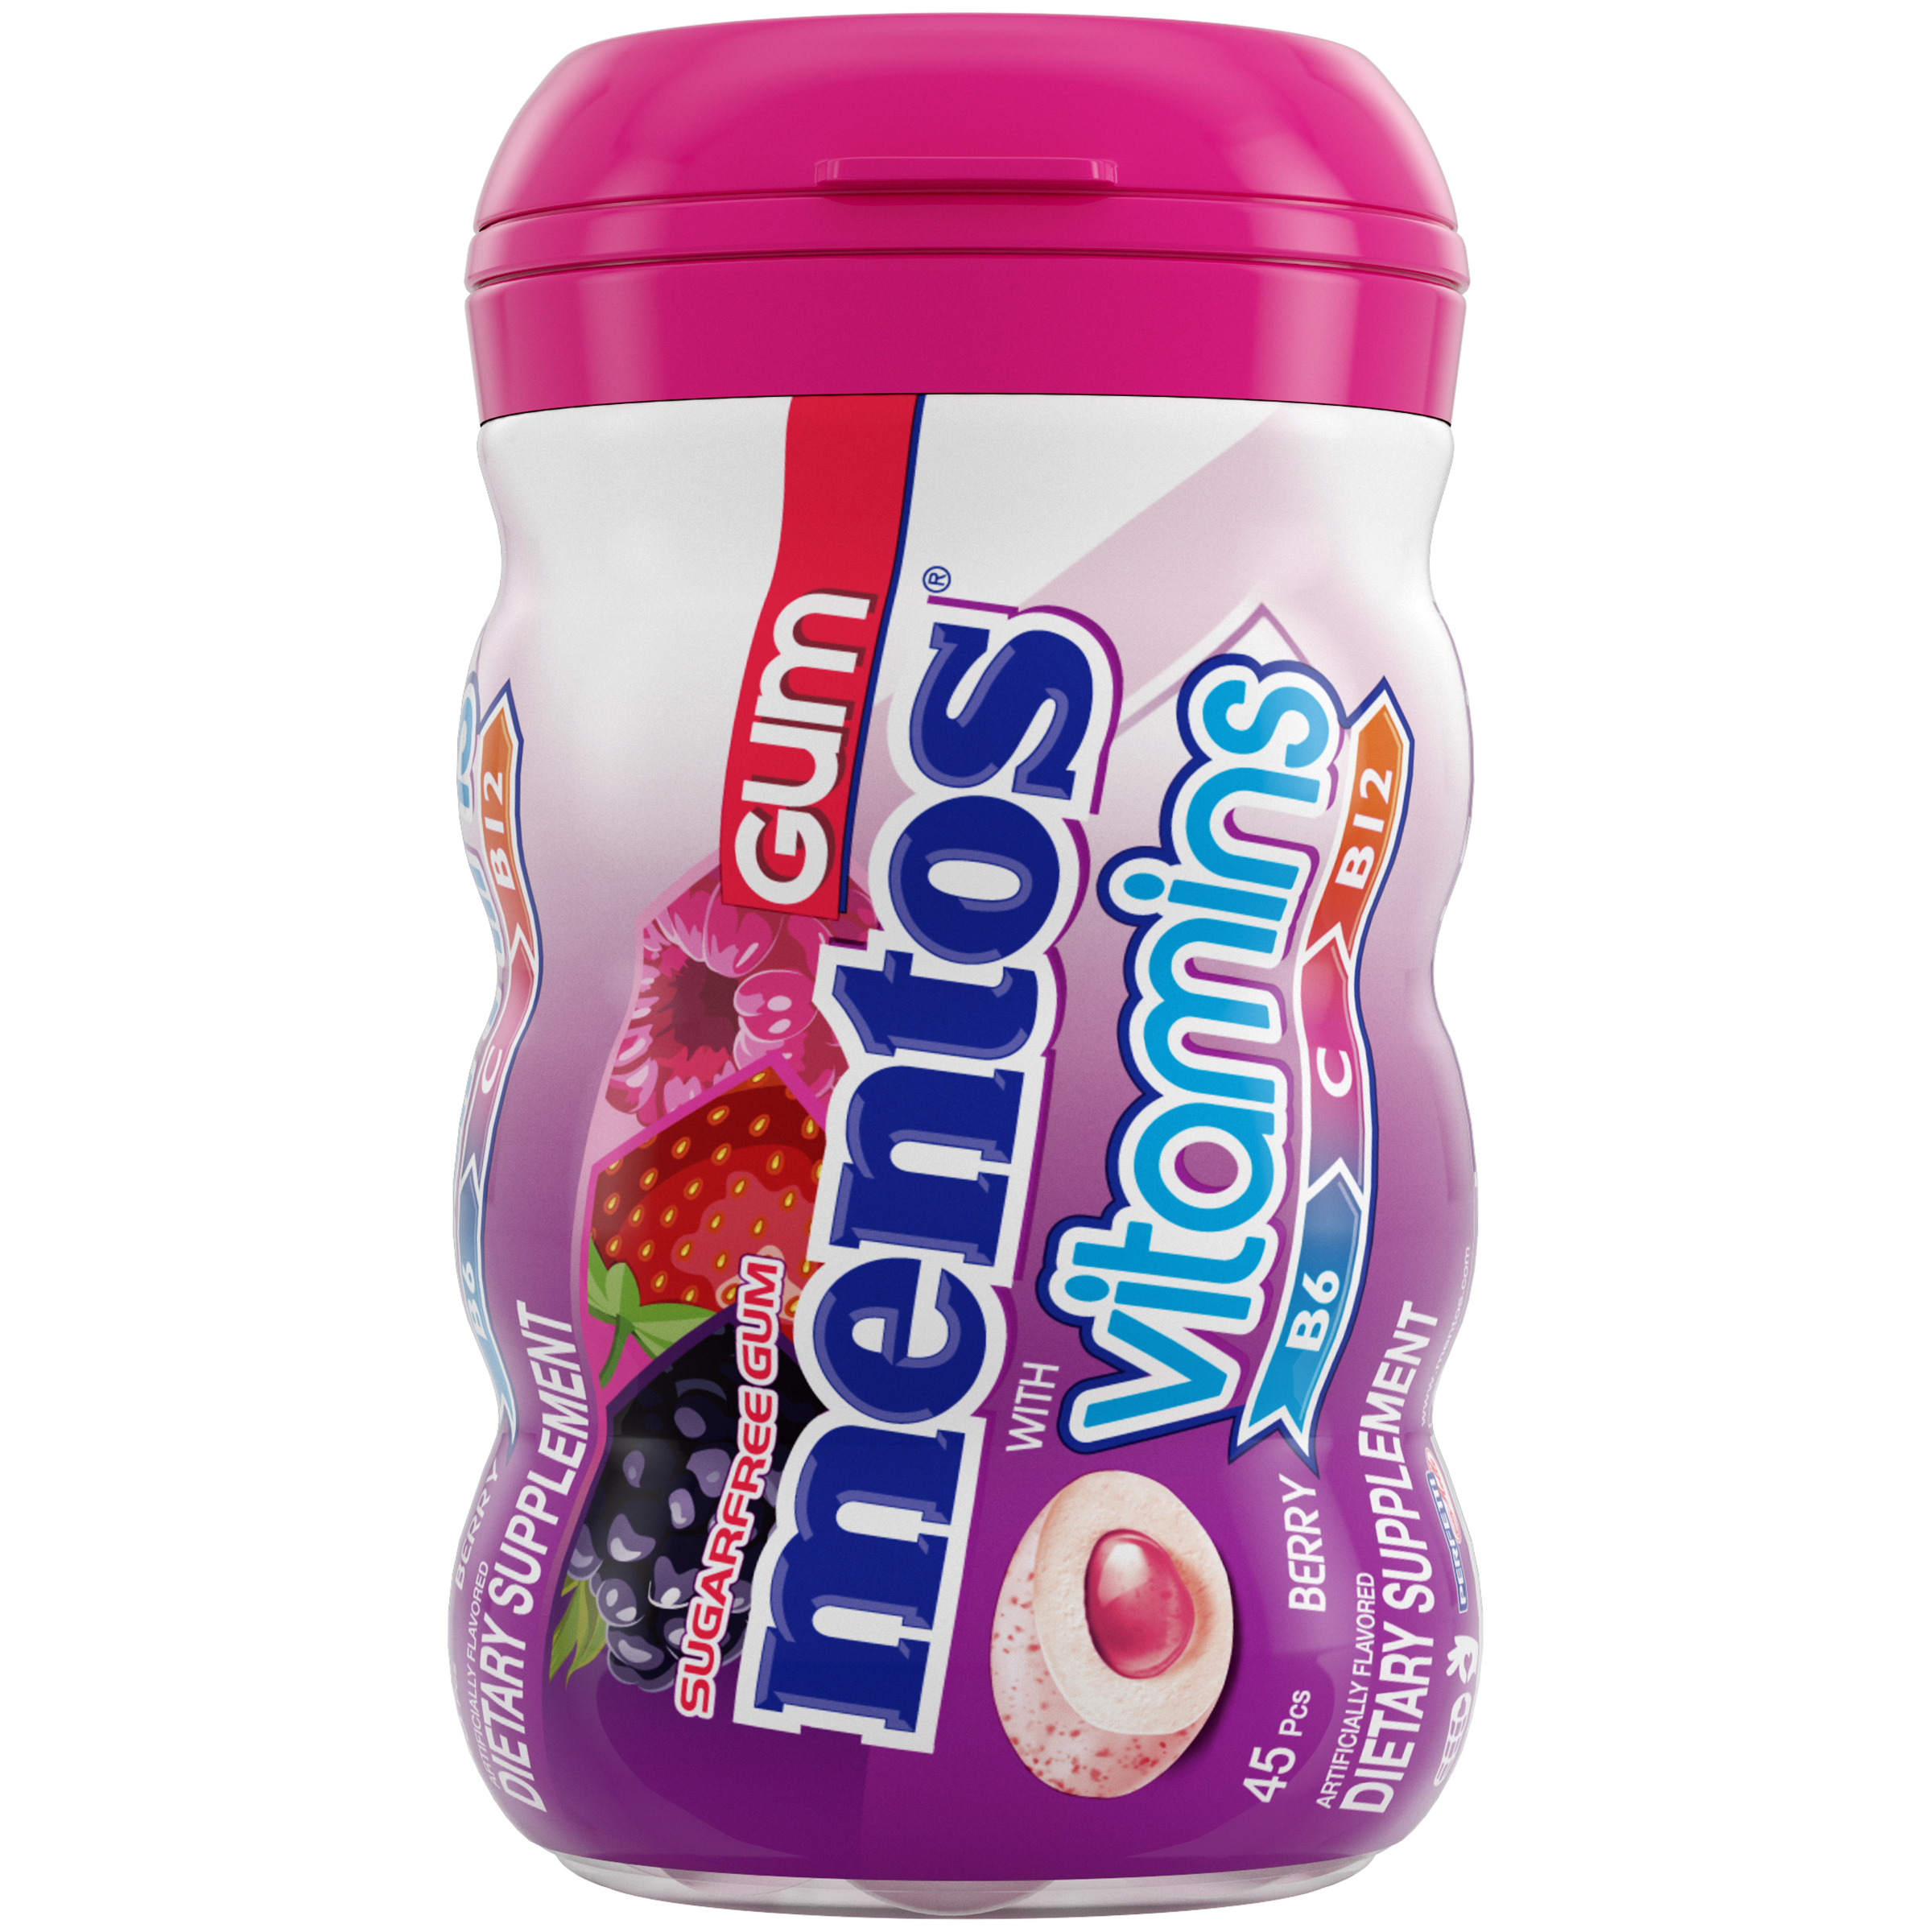 Mentos Sugar Free Chewing Gum with Vitamins B6, C and B12, Berry, 45 Regular Size Piece Bottle - image 1 of 6